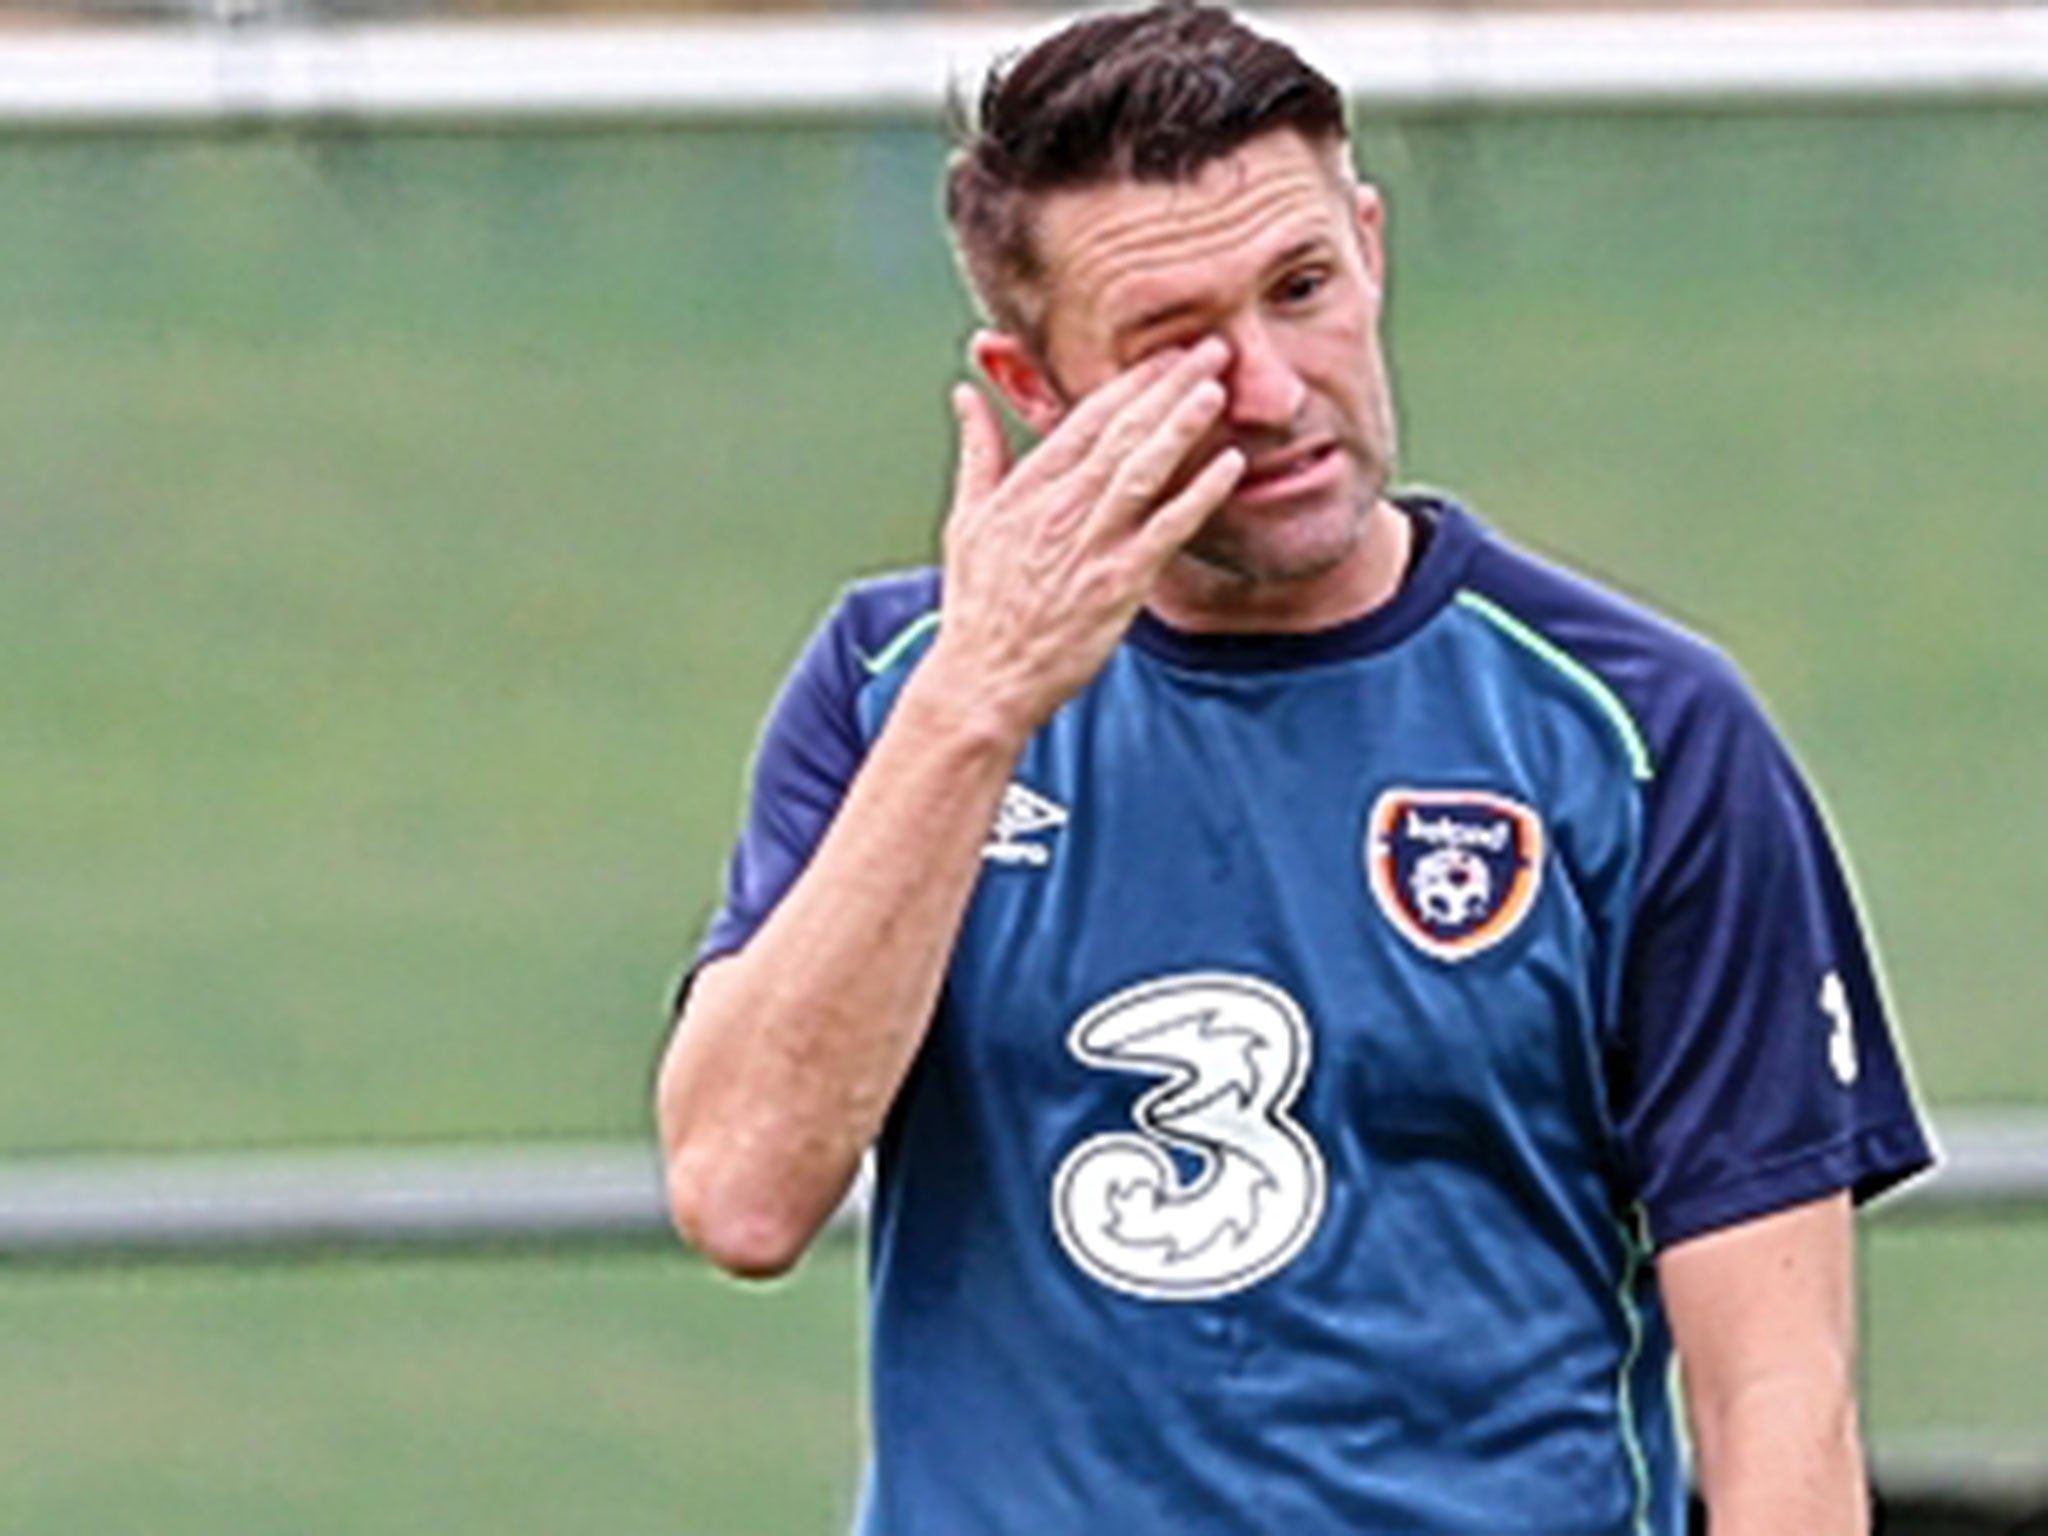 Robbie Keane’s family has suffered a double tragedy